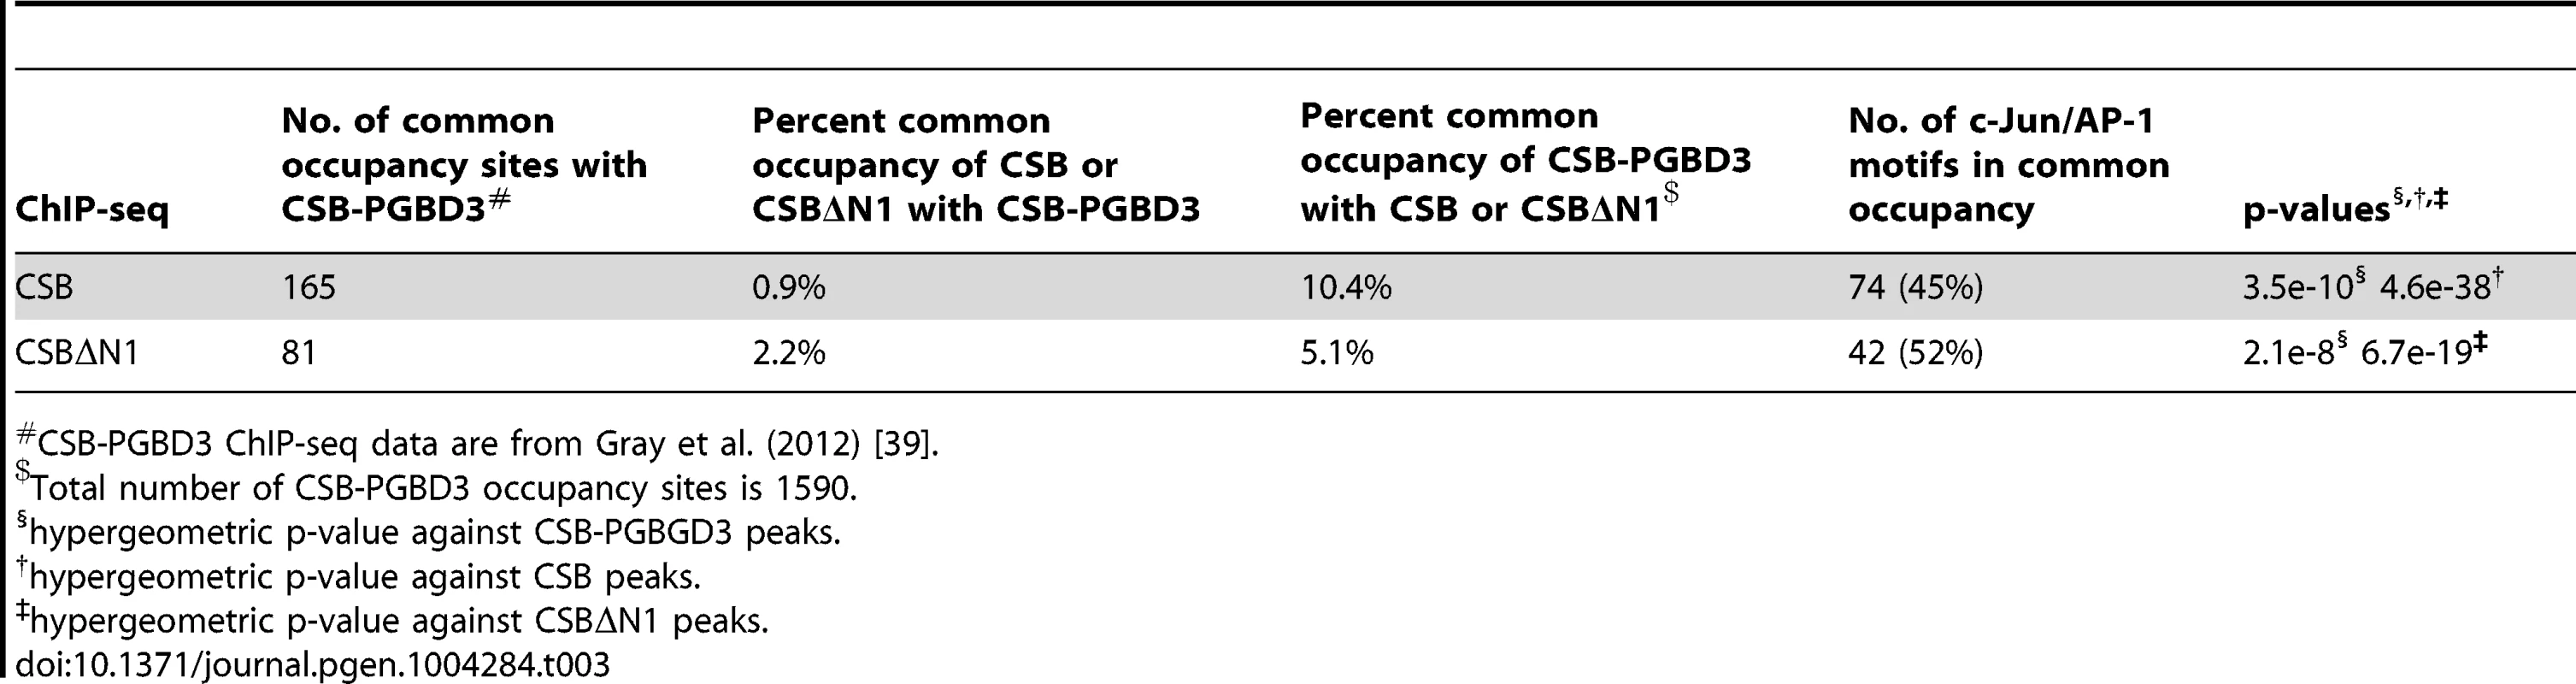 Comparison of CSB and CSBΔN1 occupancy with CSB-PGBD3<em class=&quot;ref&quot;>#</em>.